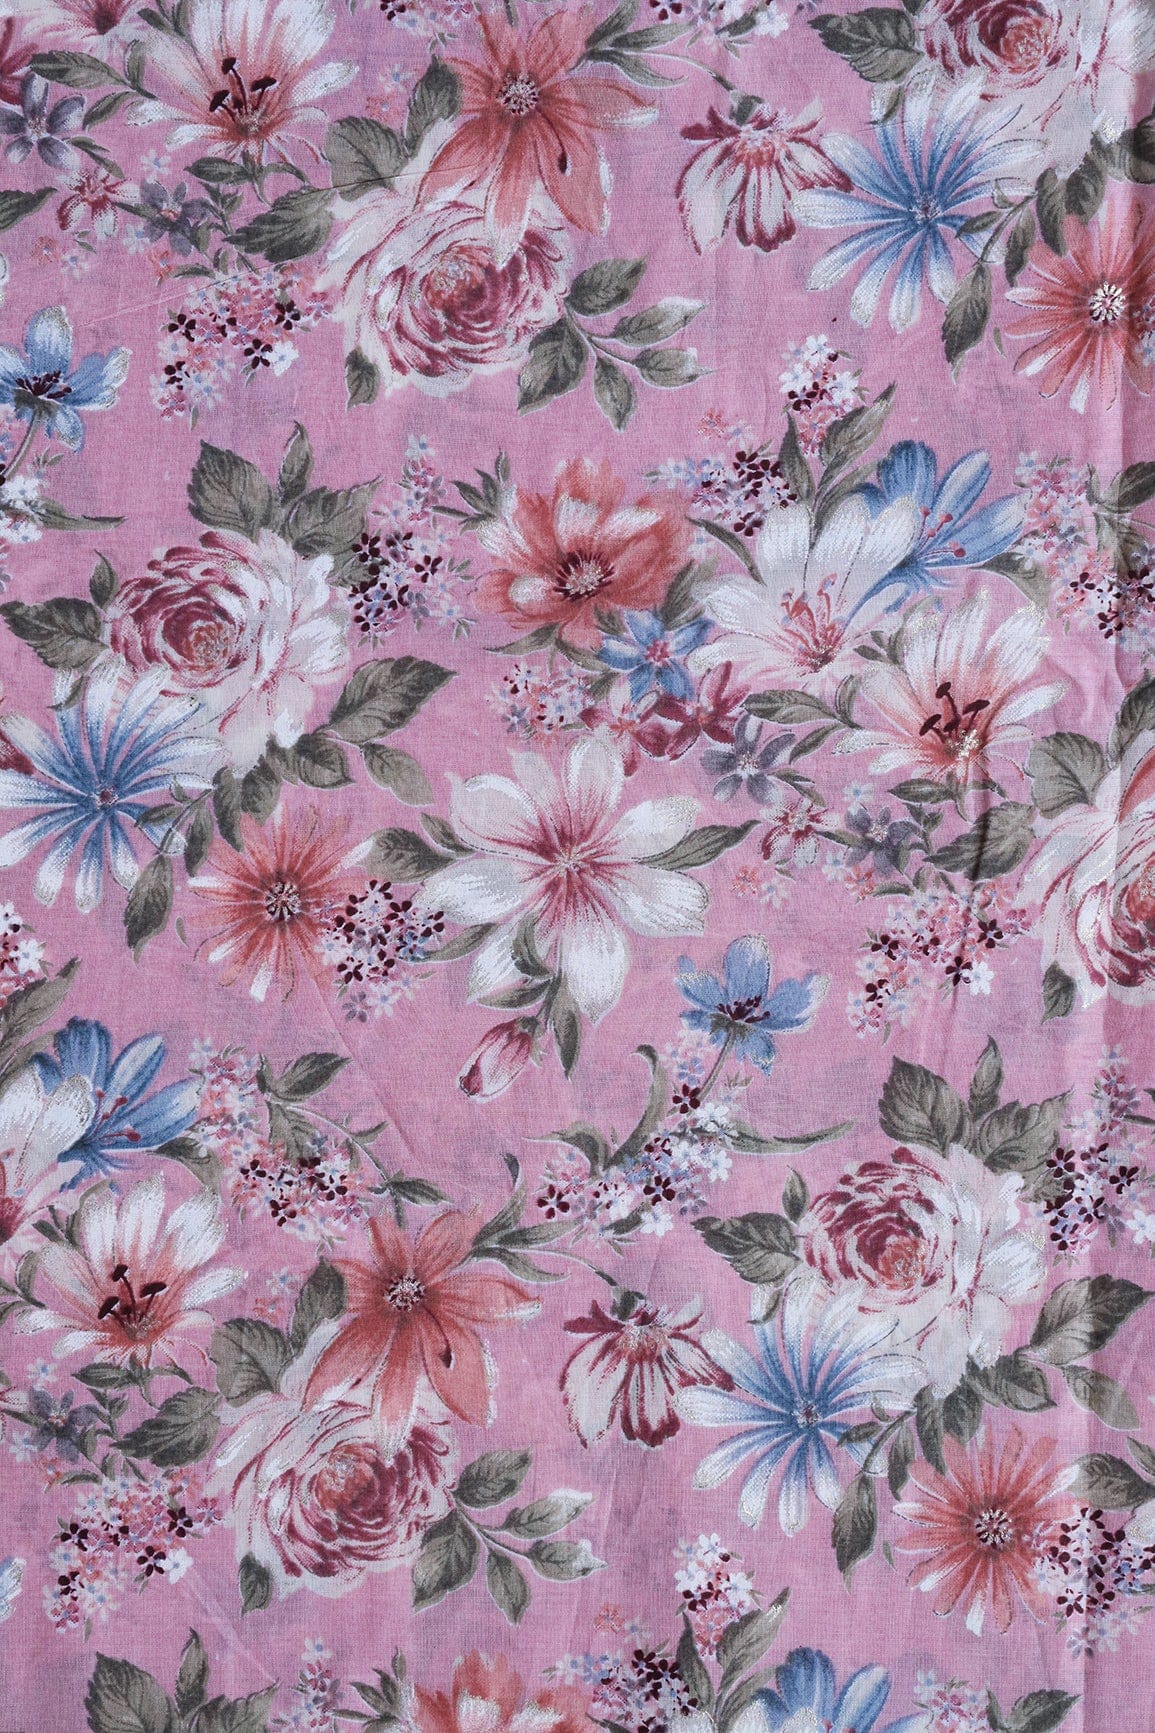 doeraa Prints Pastel Pink And White Color Floral Foil Print On Pure Mul Cotton Fabric